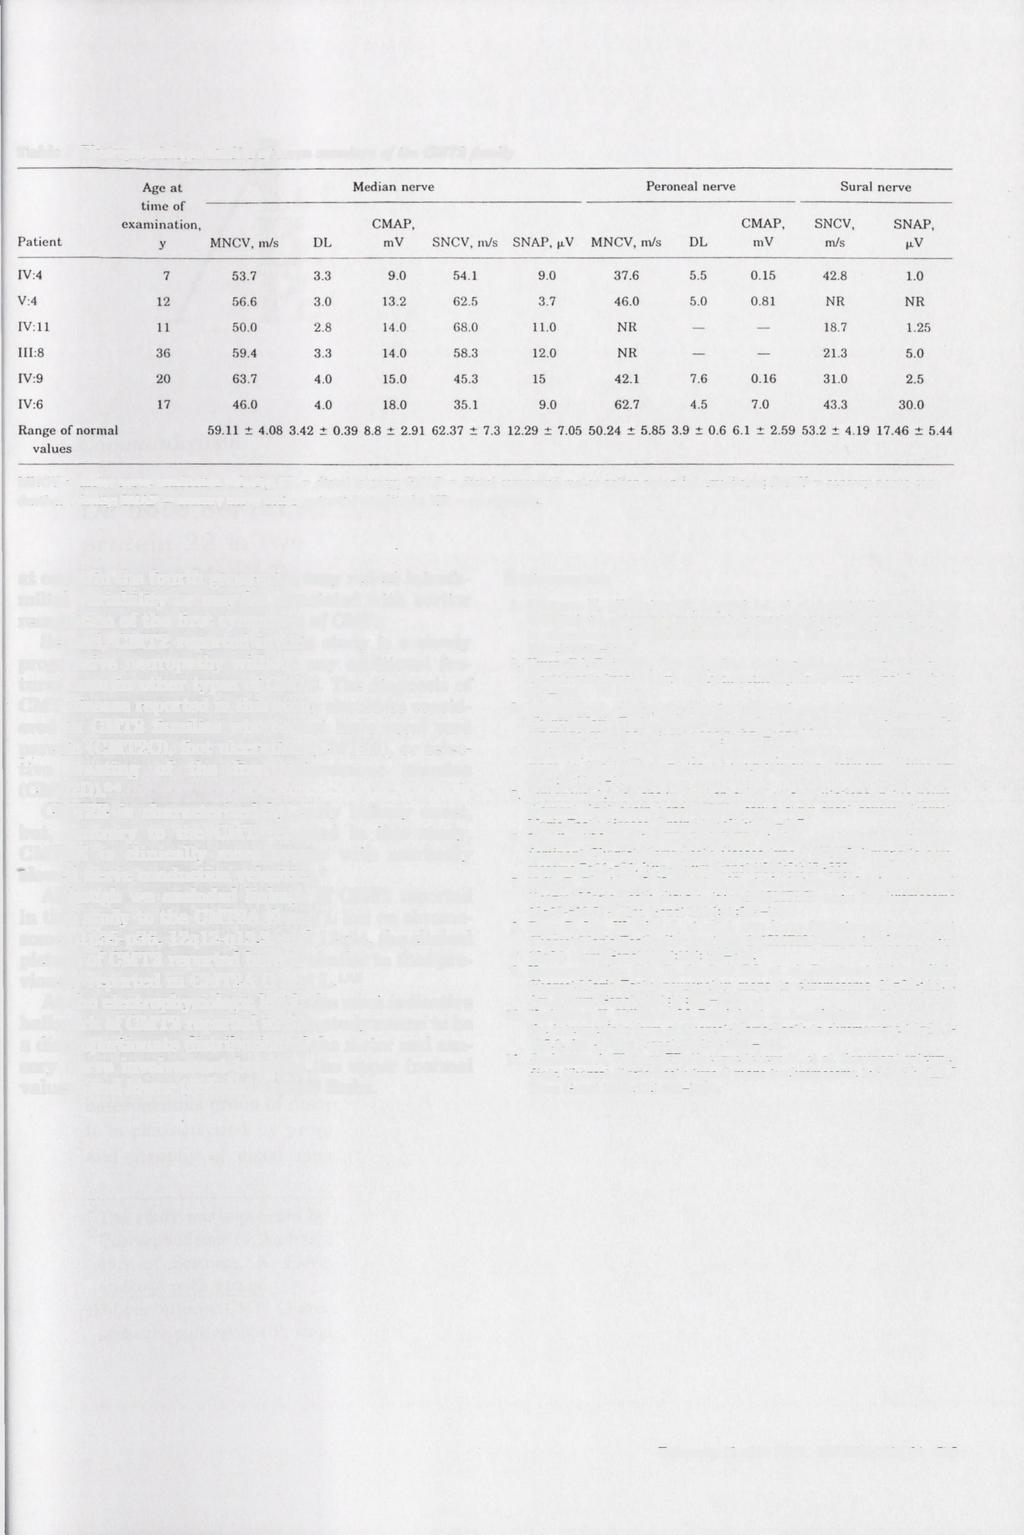 Table 2 Electrophysiologic studies of seven members of the CMT2 family MNCV = motor nerve conduction velocity; DL = distal latency; CMAP = distal compound motor action potential amplitude; SNCV =